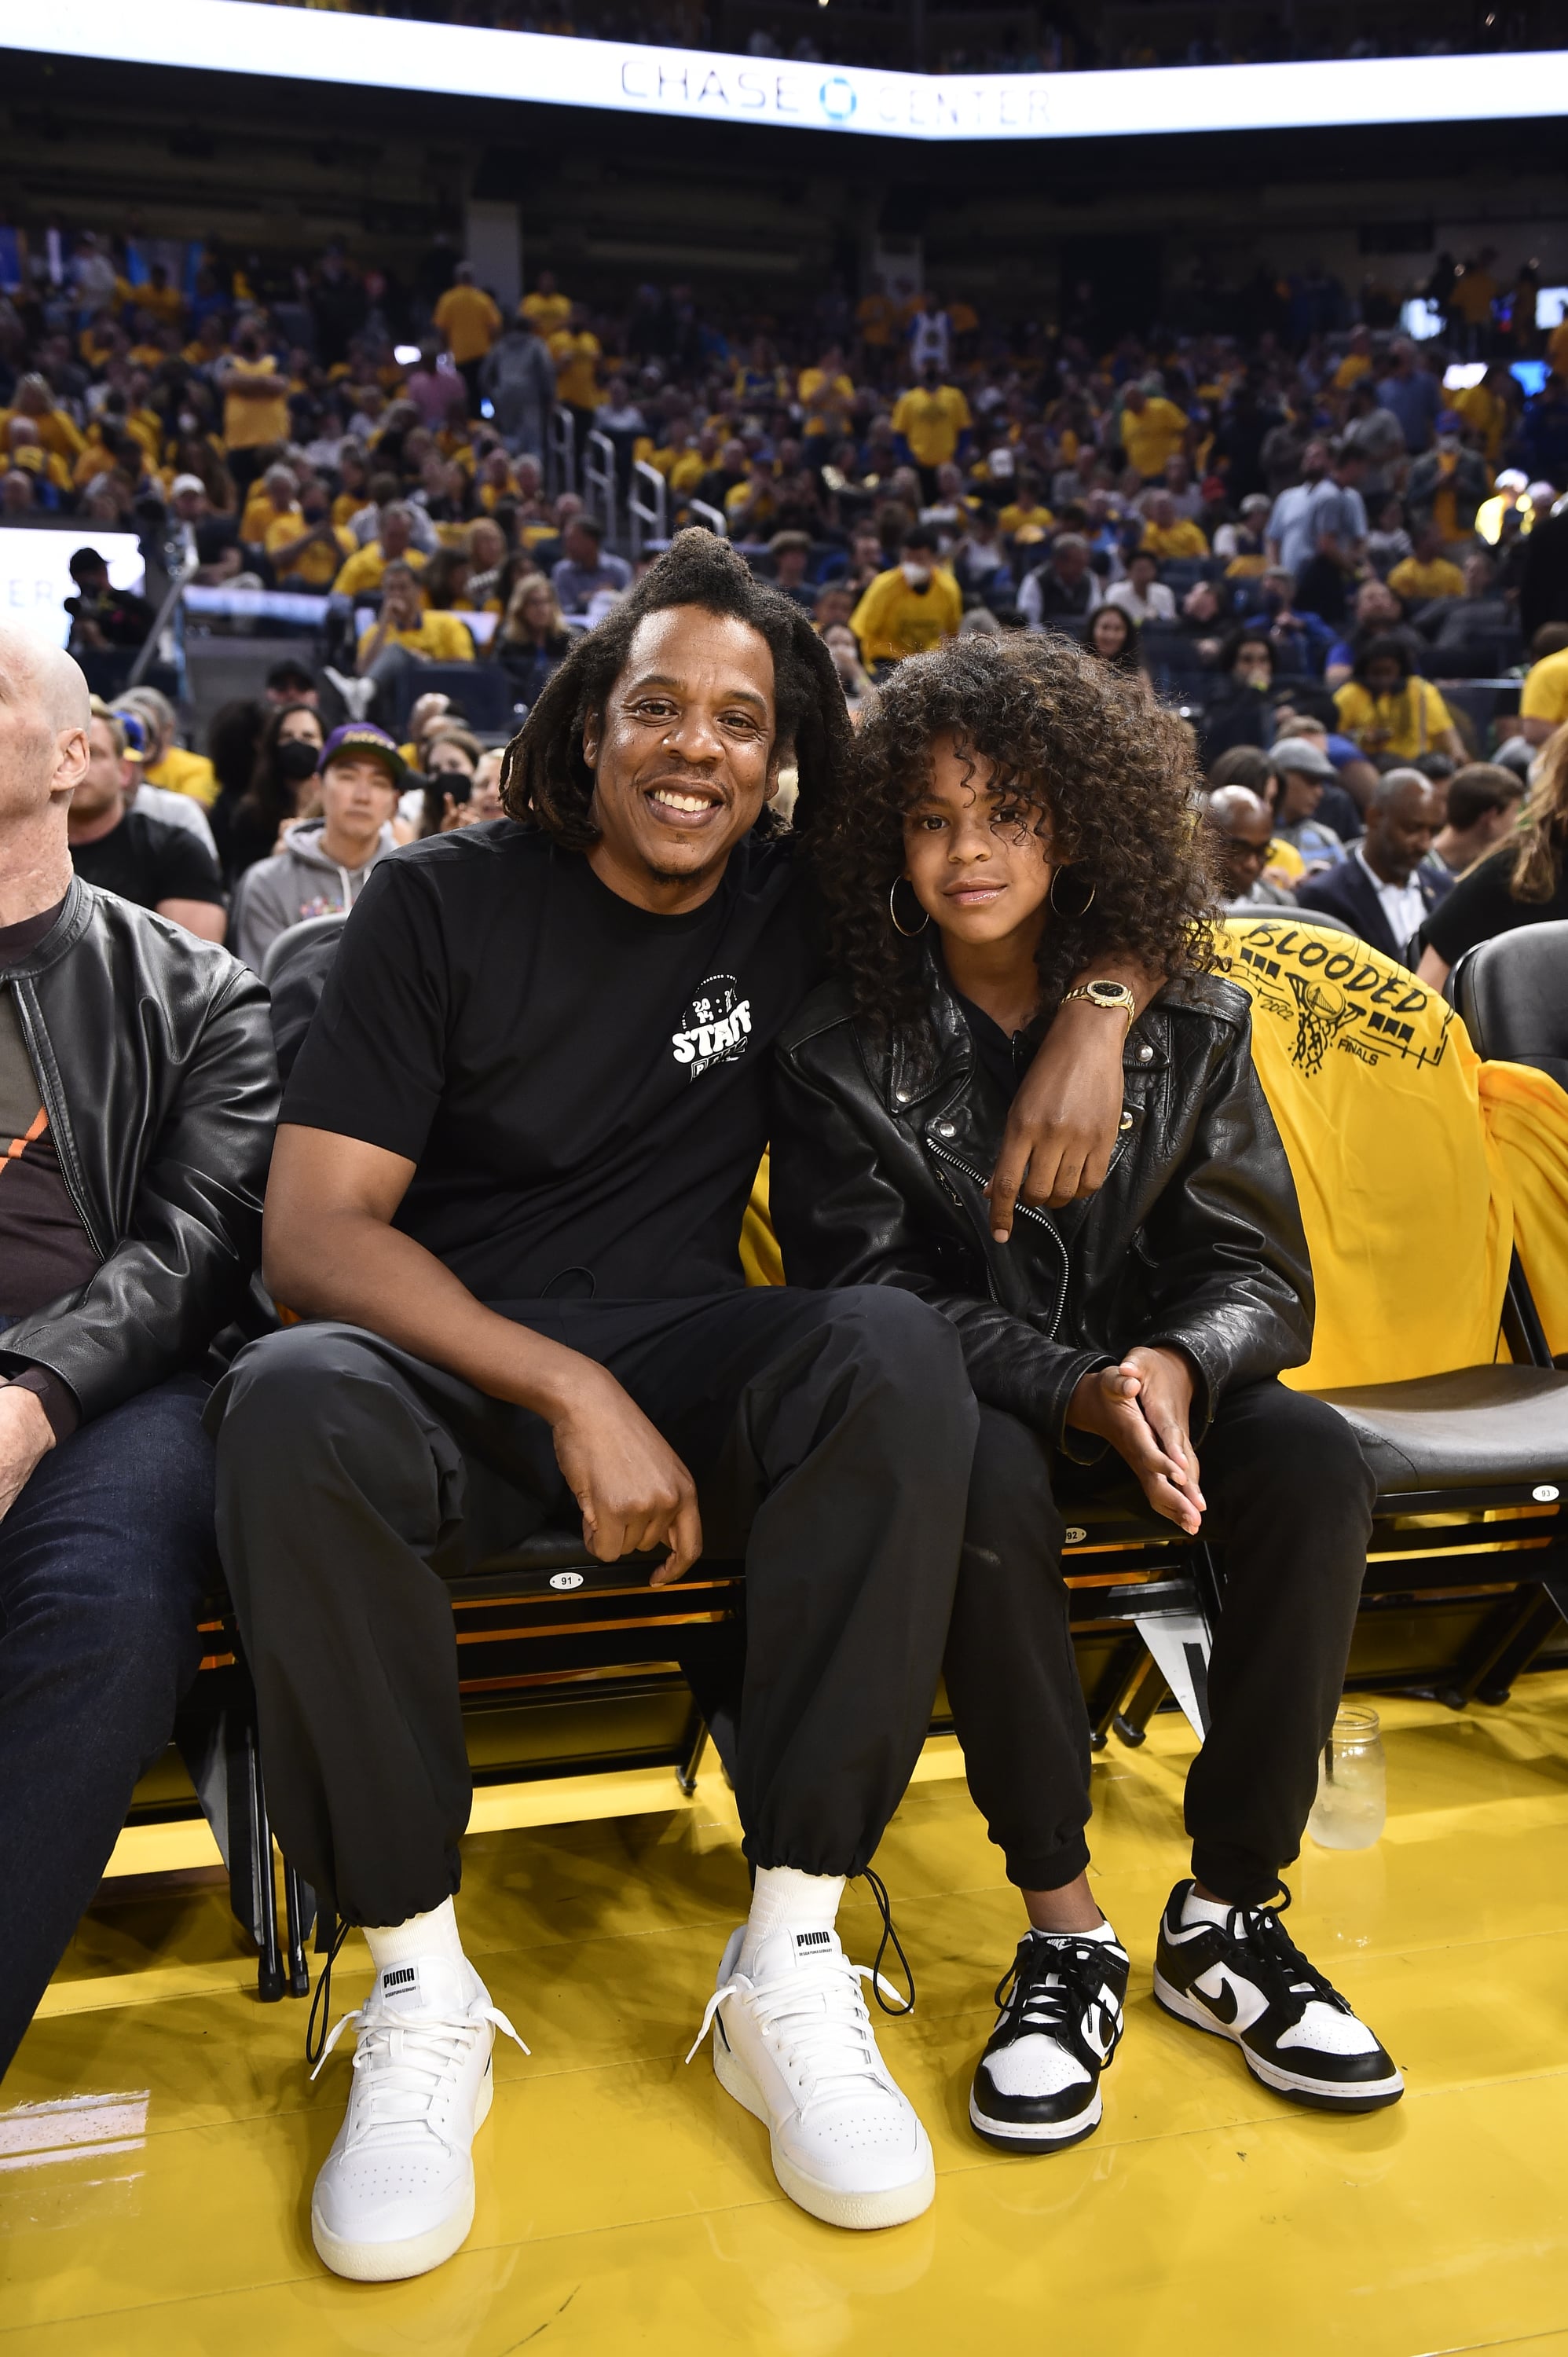 SAN FRANCISCO, CA - JUNE 13: Jay-Z and his daughter Blue Ivy Carter poses for a photo during the game of the Boston Celtics against the Golden State Warriors during Game Five of the 2022 NBA Finals on June 13, 2022 at Chase Centre in San Francisco, California. NOTE TO USER: User expressly acknowledges and agrees that, by downloading and or using this photograph, user is consenting to the terms and conditions of Getty Images Licence Agreement. Mandatory Copyright Notice: Copyright 2022 NBAE (Photo by David Dow/NBAE via Getty Images)